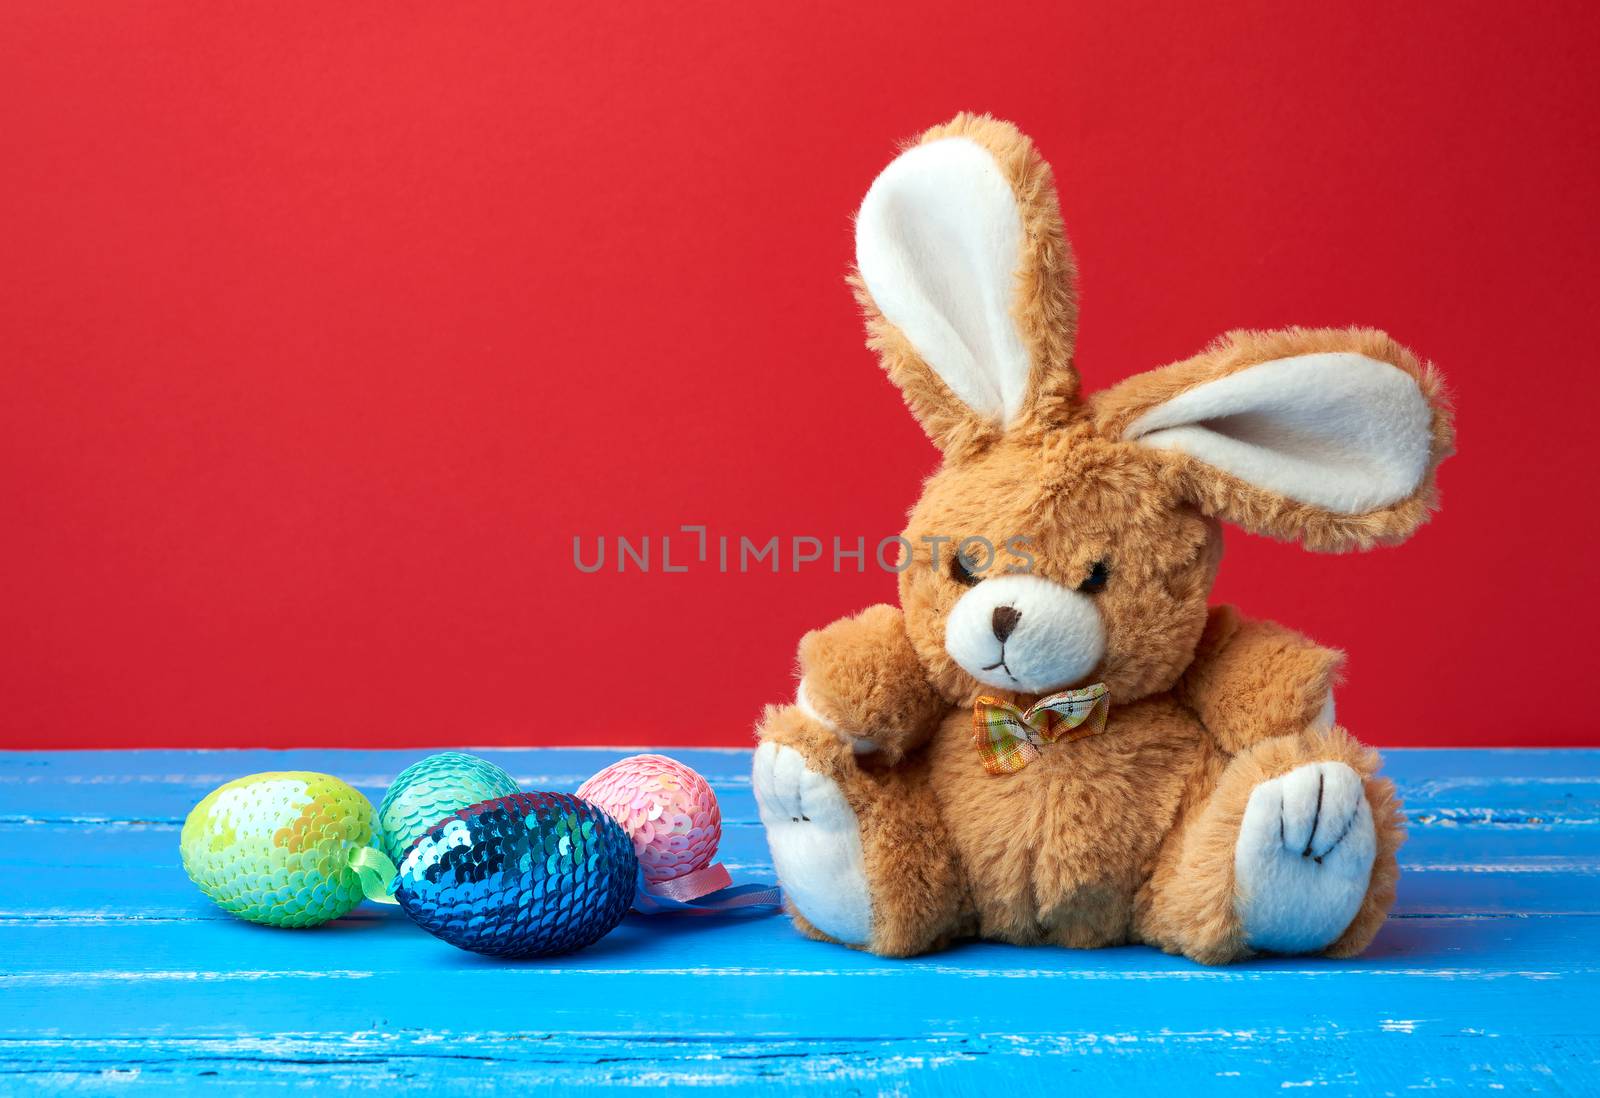 cute rabbit toy and decorative Easter eggs with sequins on a red background, festive backdrop